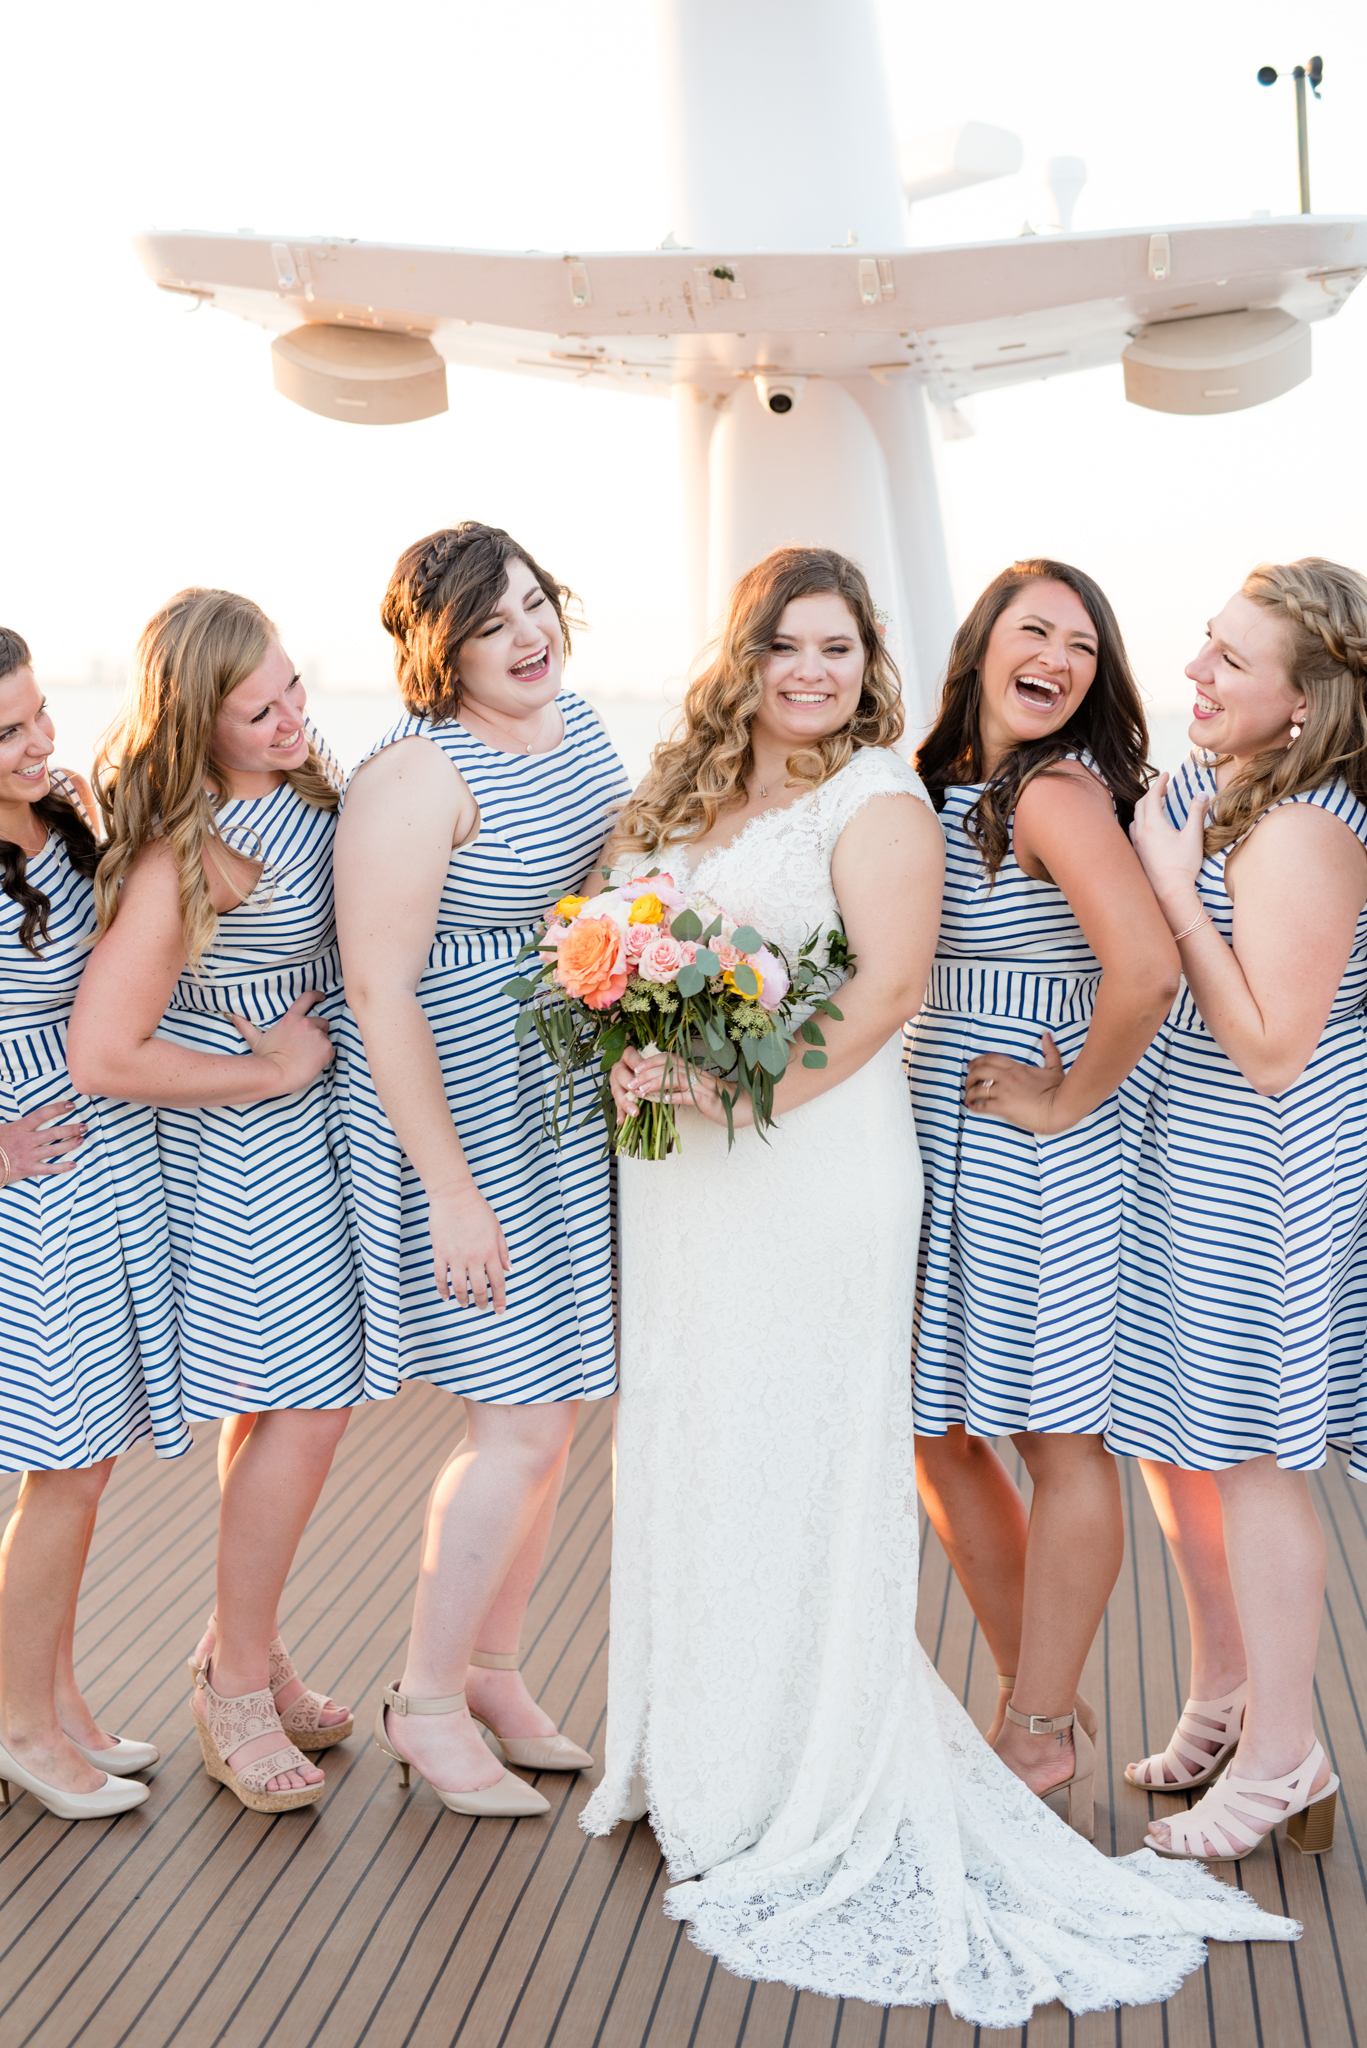 Bride and bridesmaids have fun on yacht.